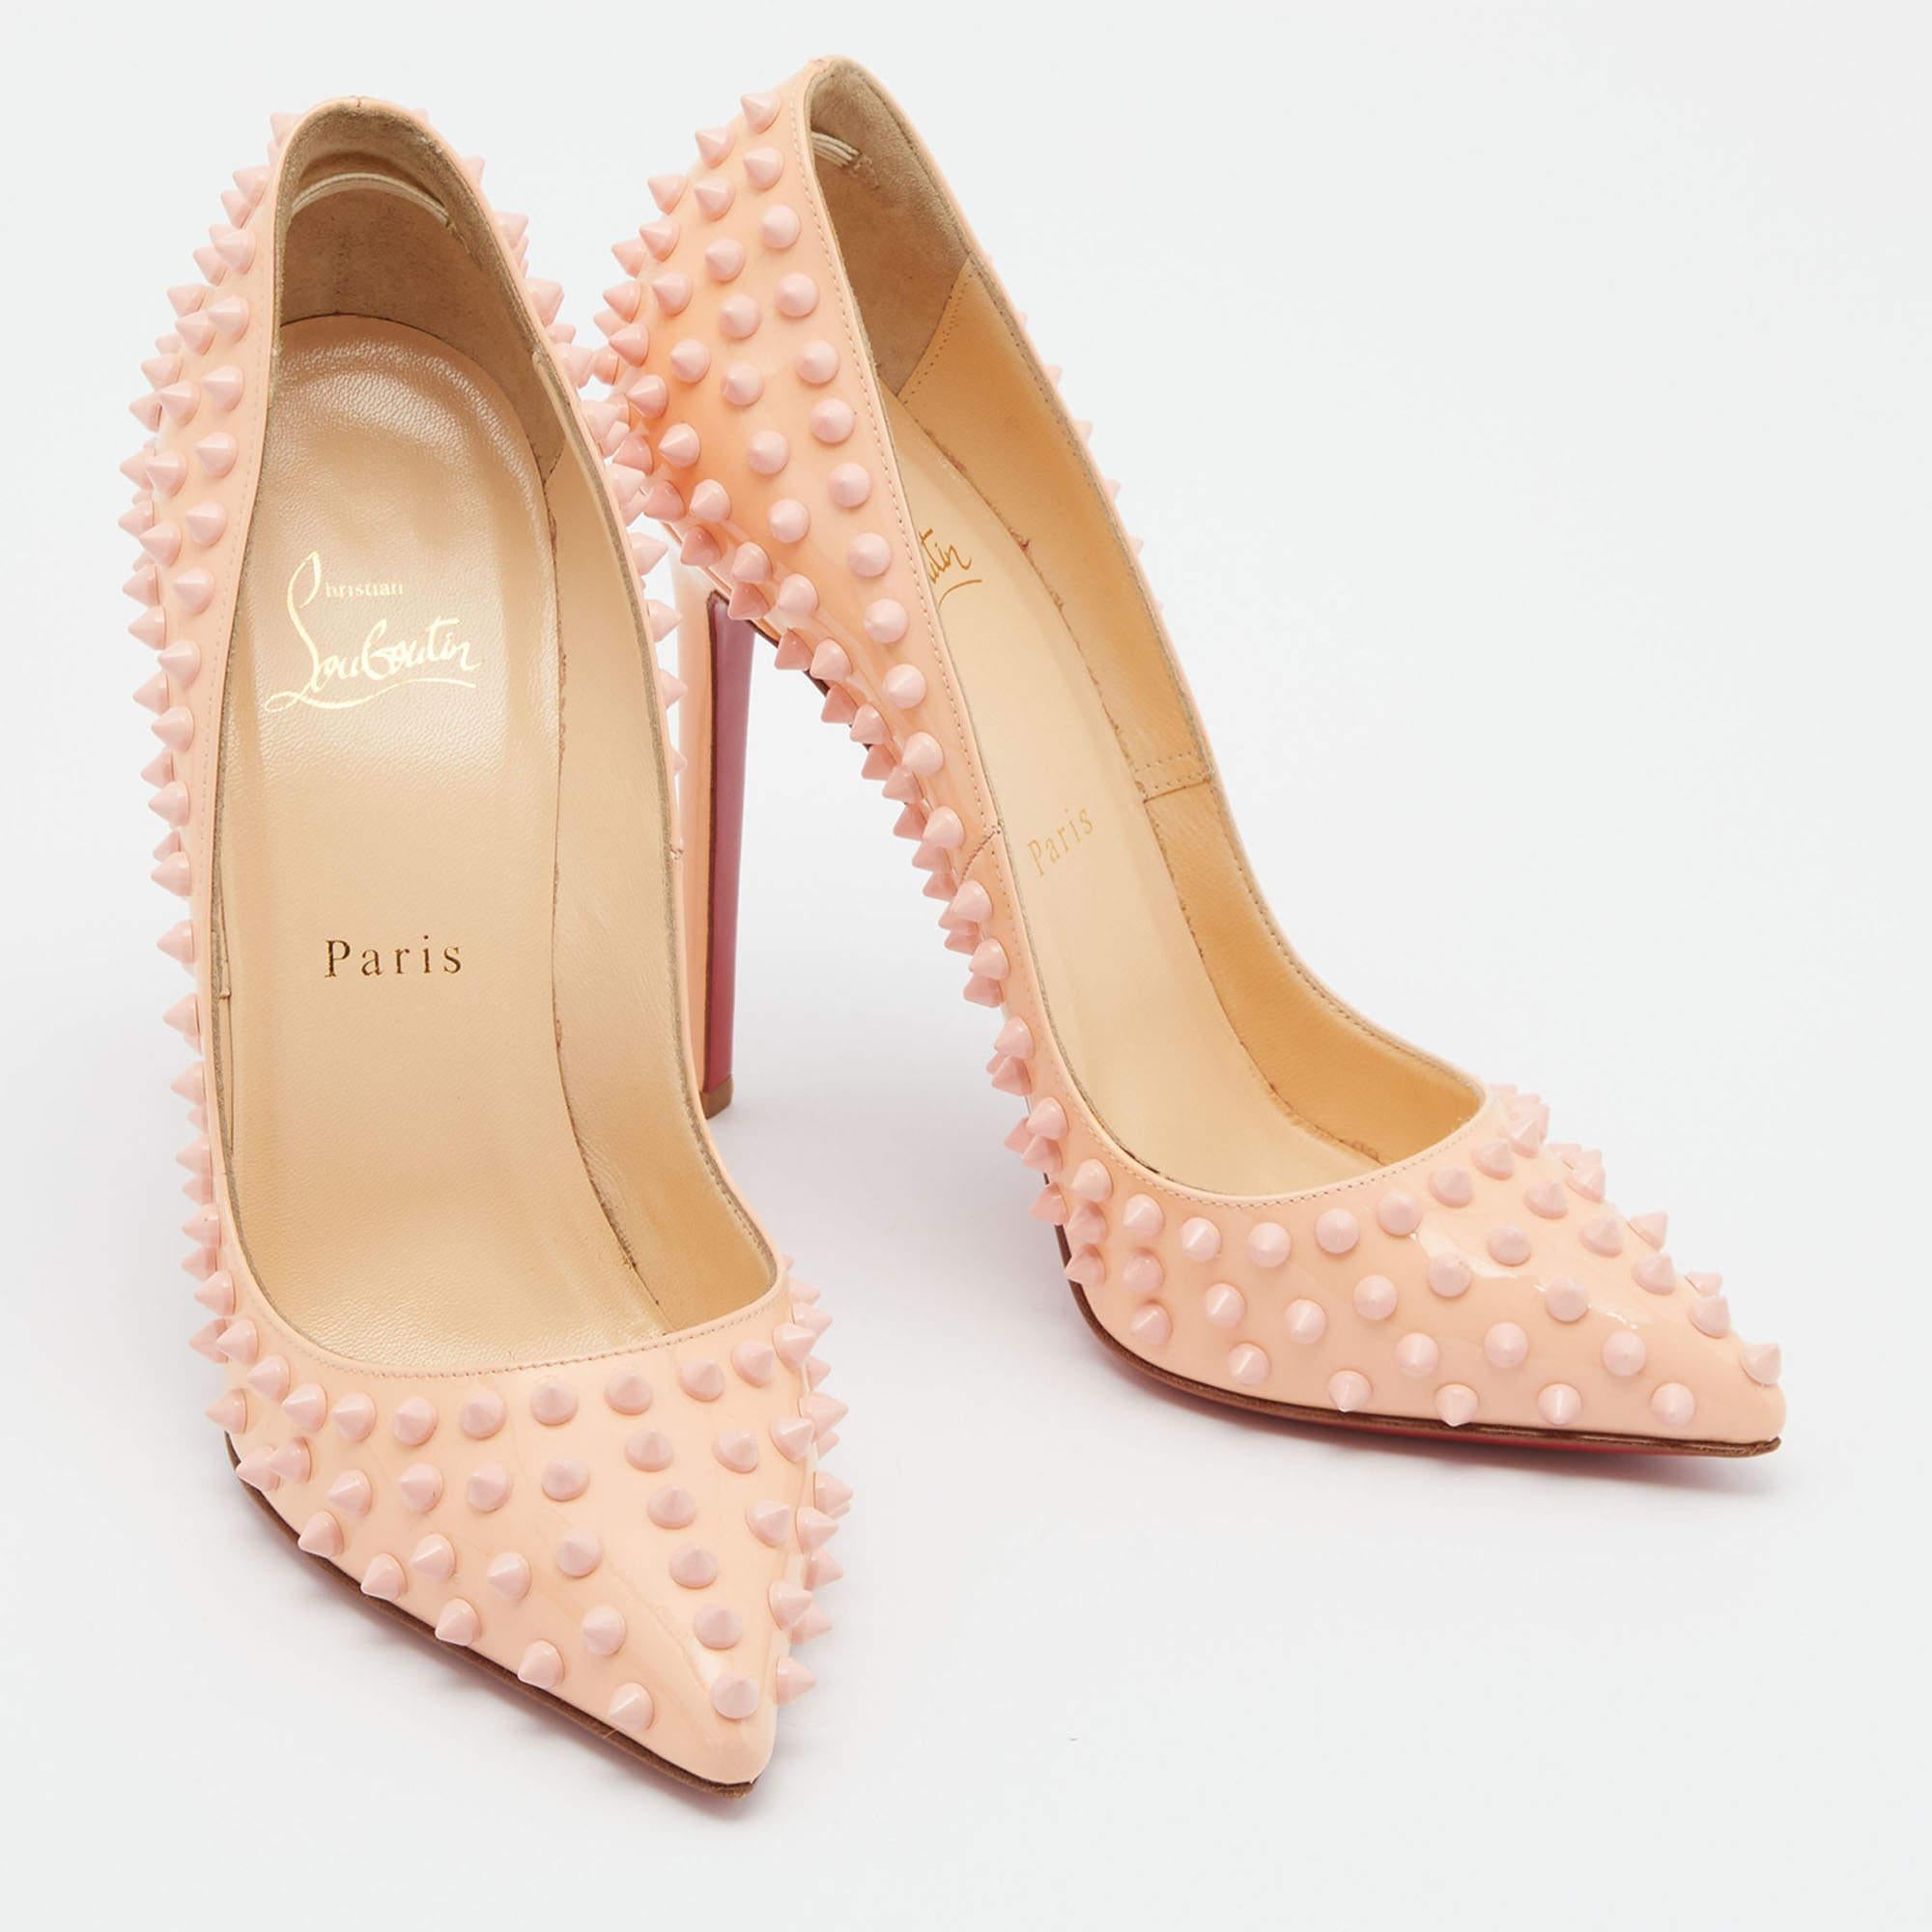 Women's Christian Louboutin Peach Patent Leather Pigalle Spikes Pointed Toe Pumps Size 3